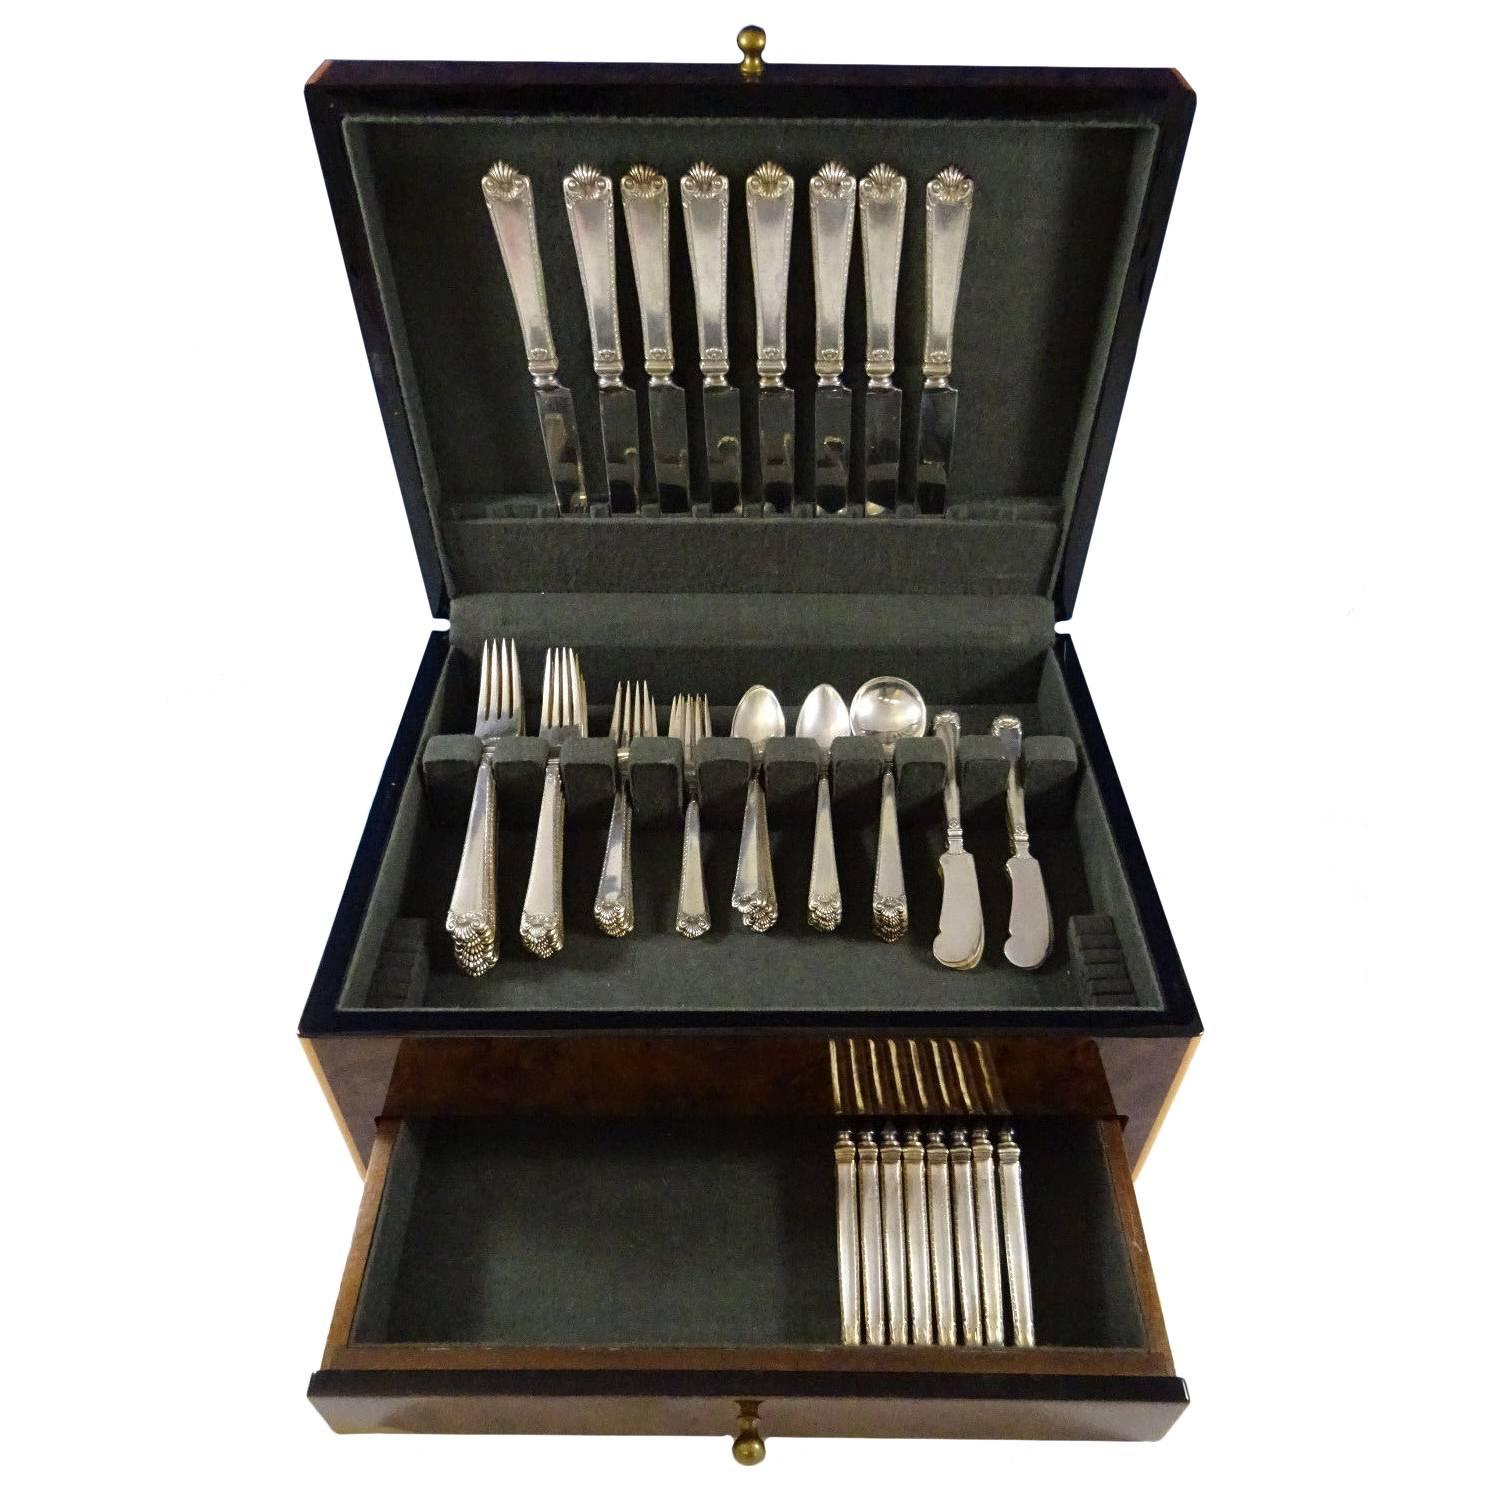 Fabulous George II Rex hand chased by Watson sterling silver dinner and lunch size flatware service of 72 pieces. This set includes: Eight dinner size knives, 10 1/8